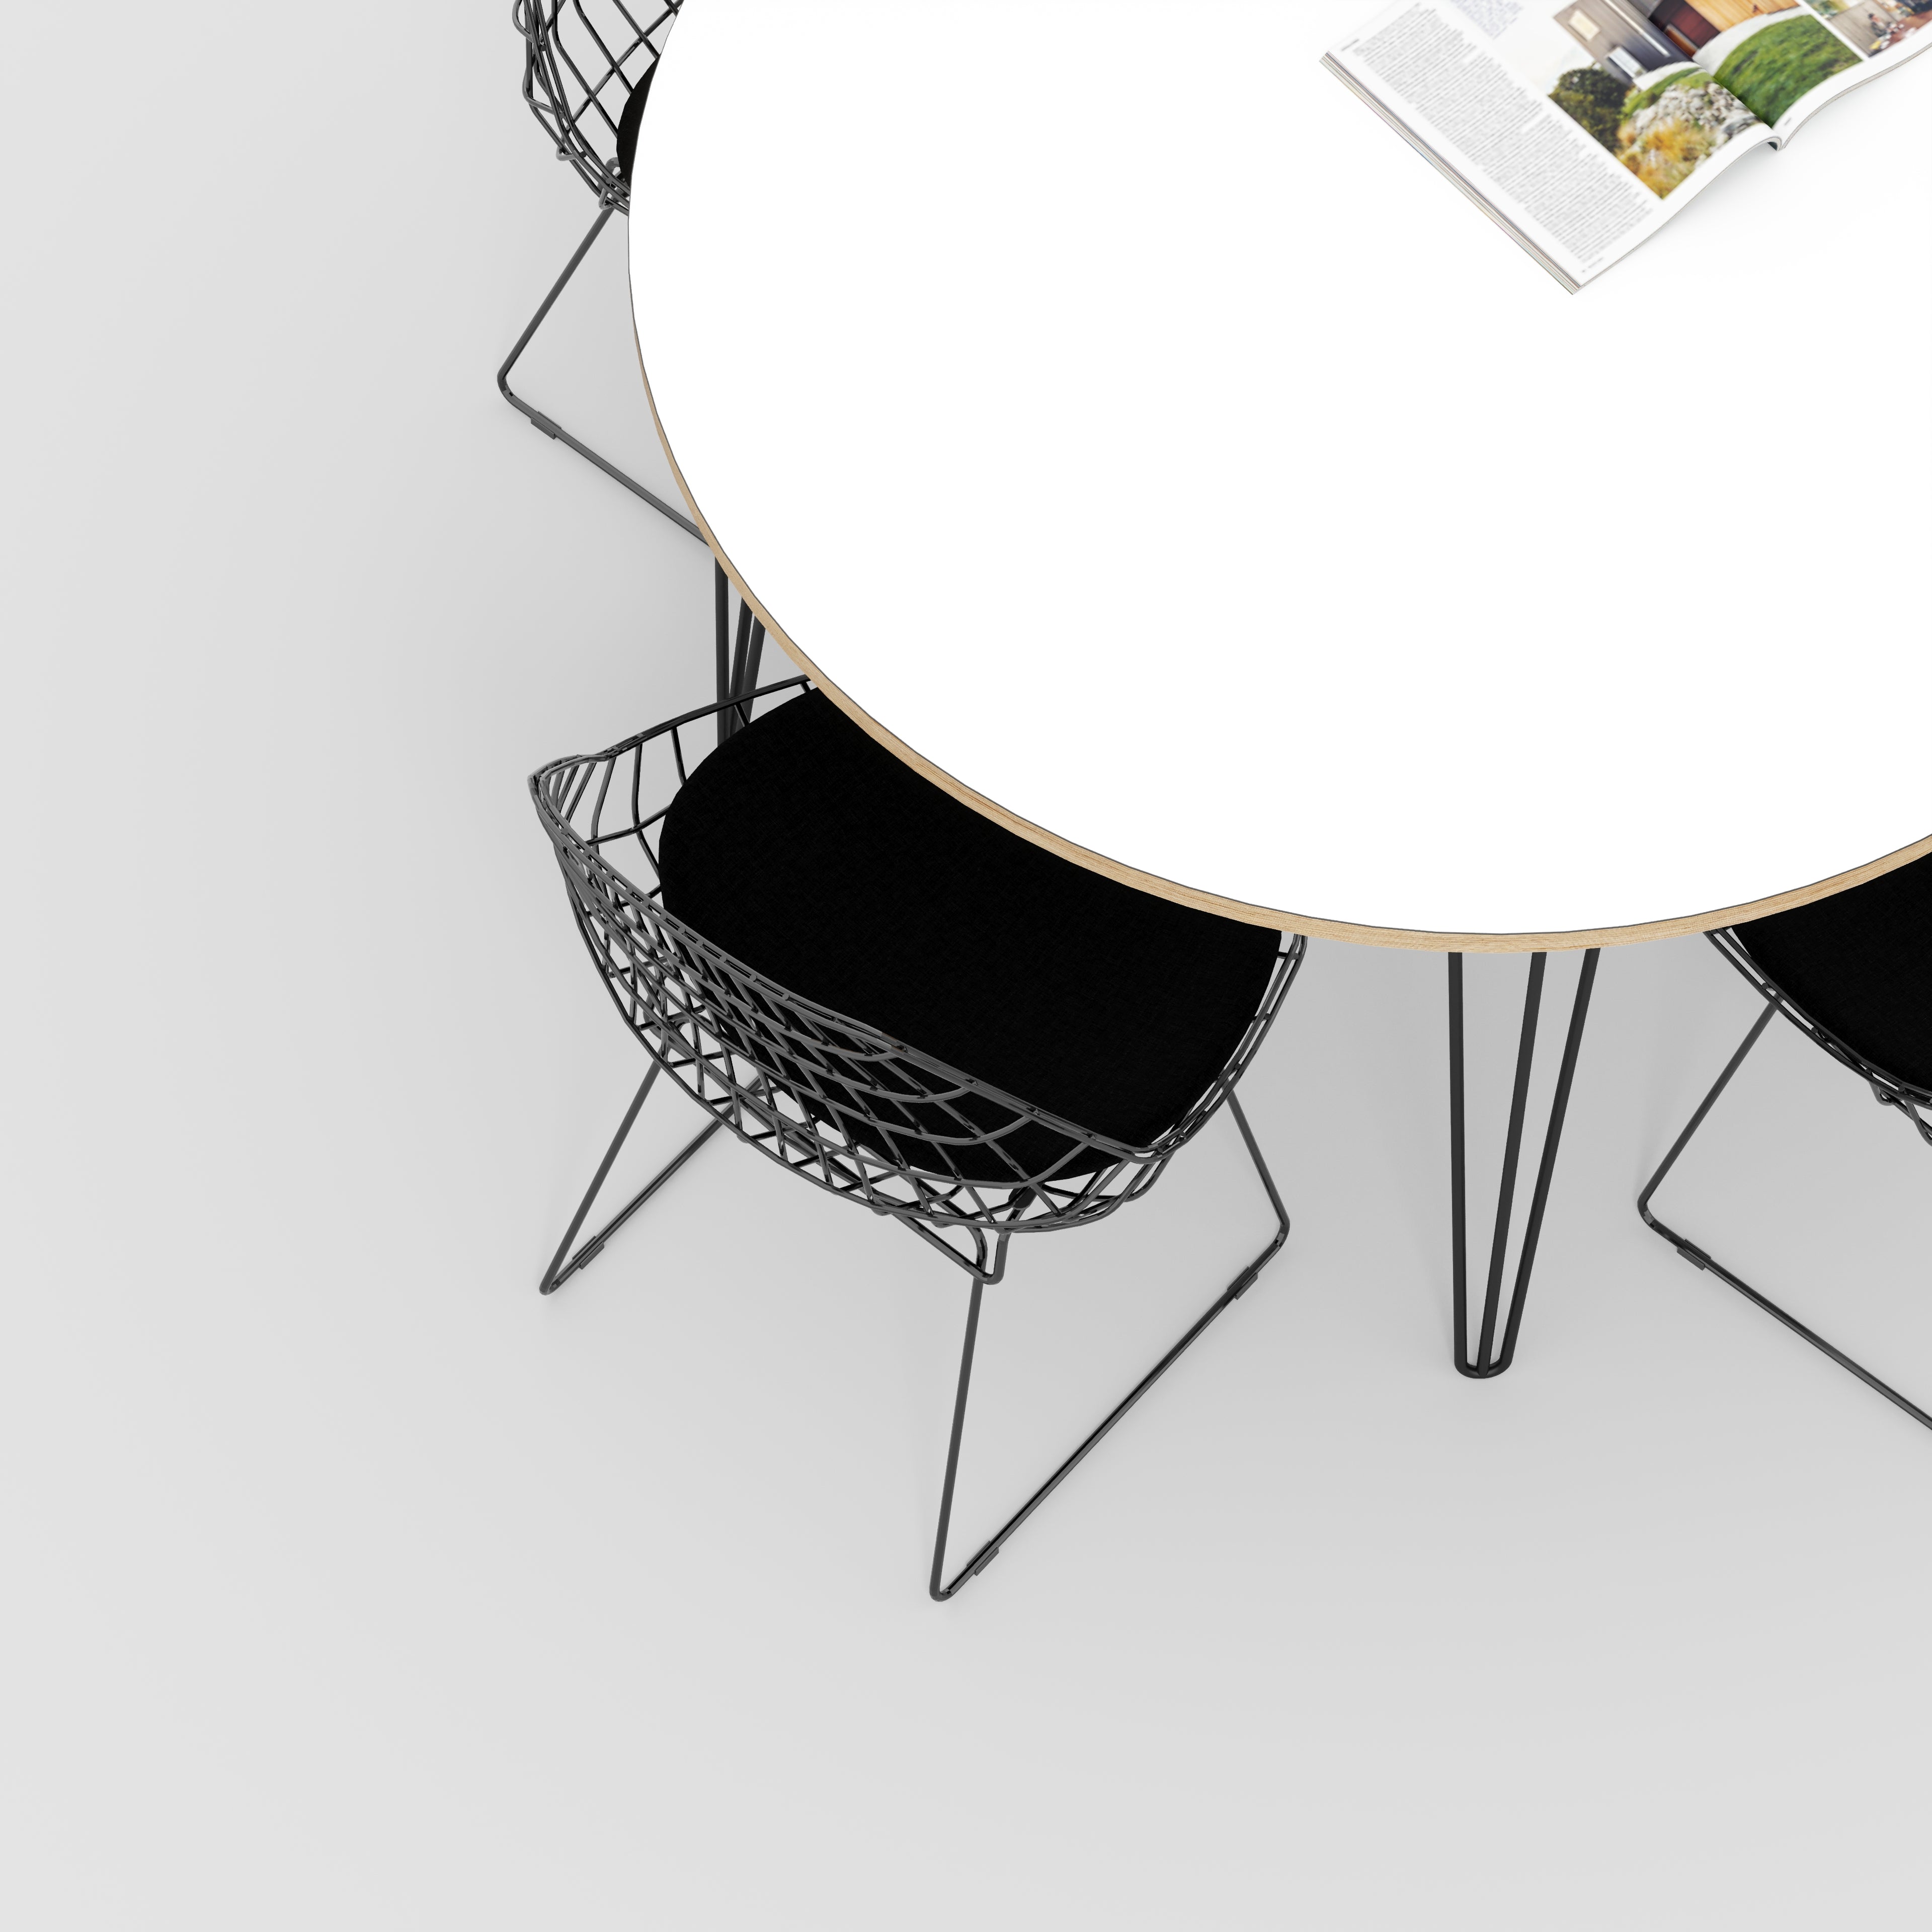 Round Table with Black Hairpin Legs - Formica White - 1200(dia) x 735(h)